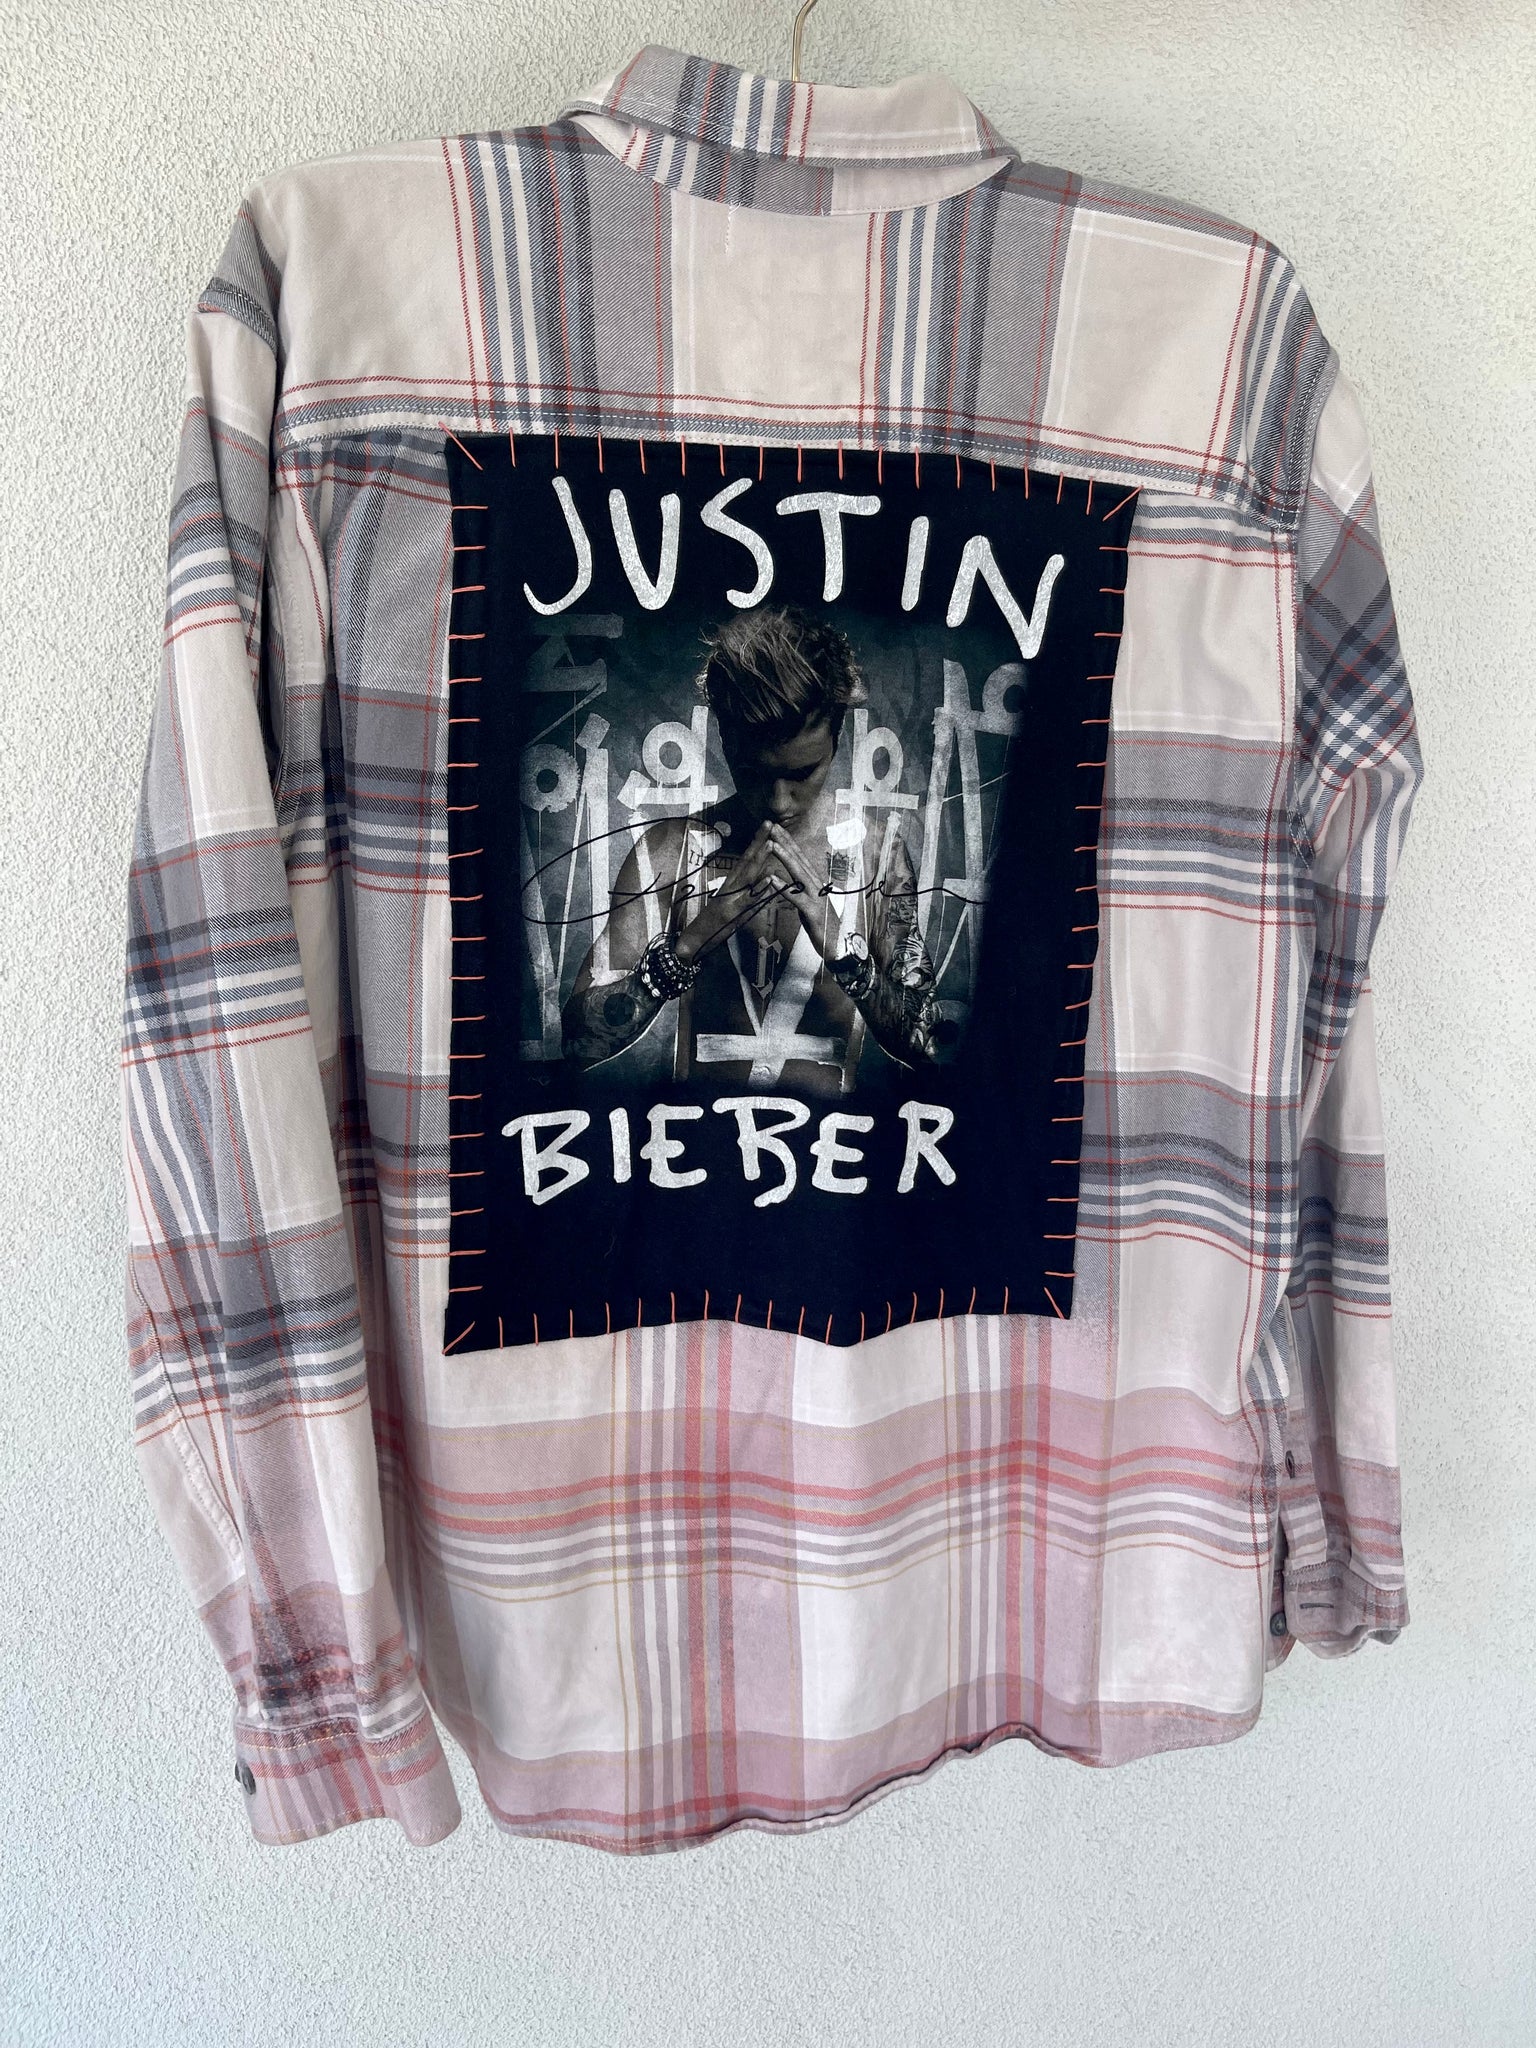 Justin Bieber Upcycled Woven Shirt